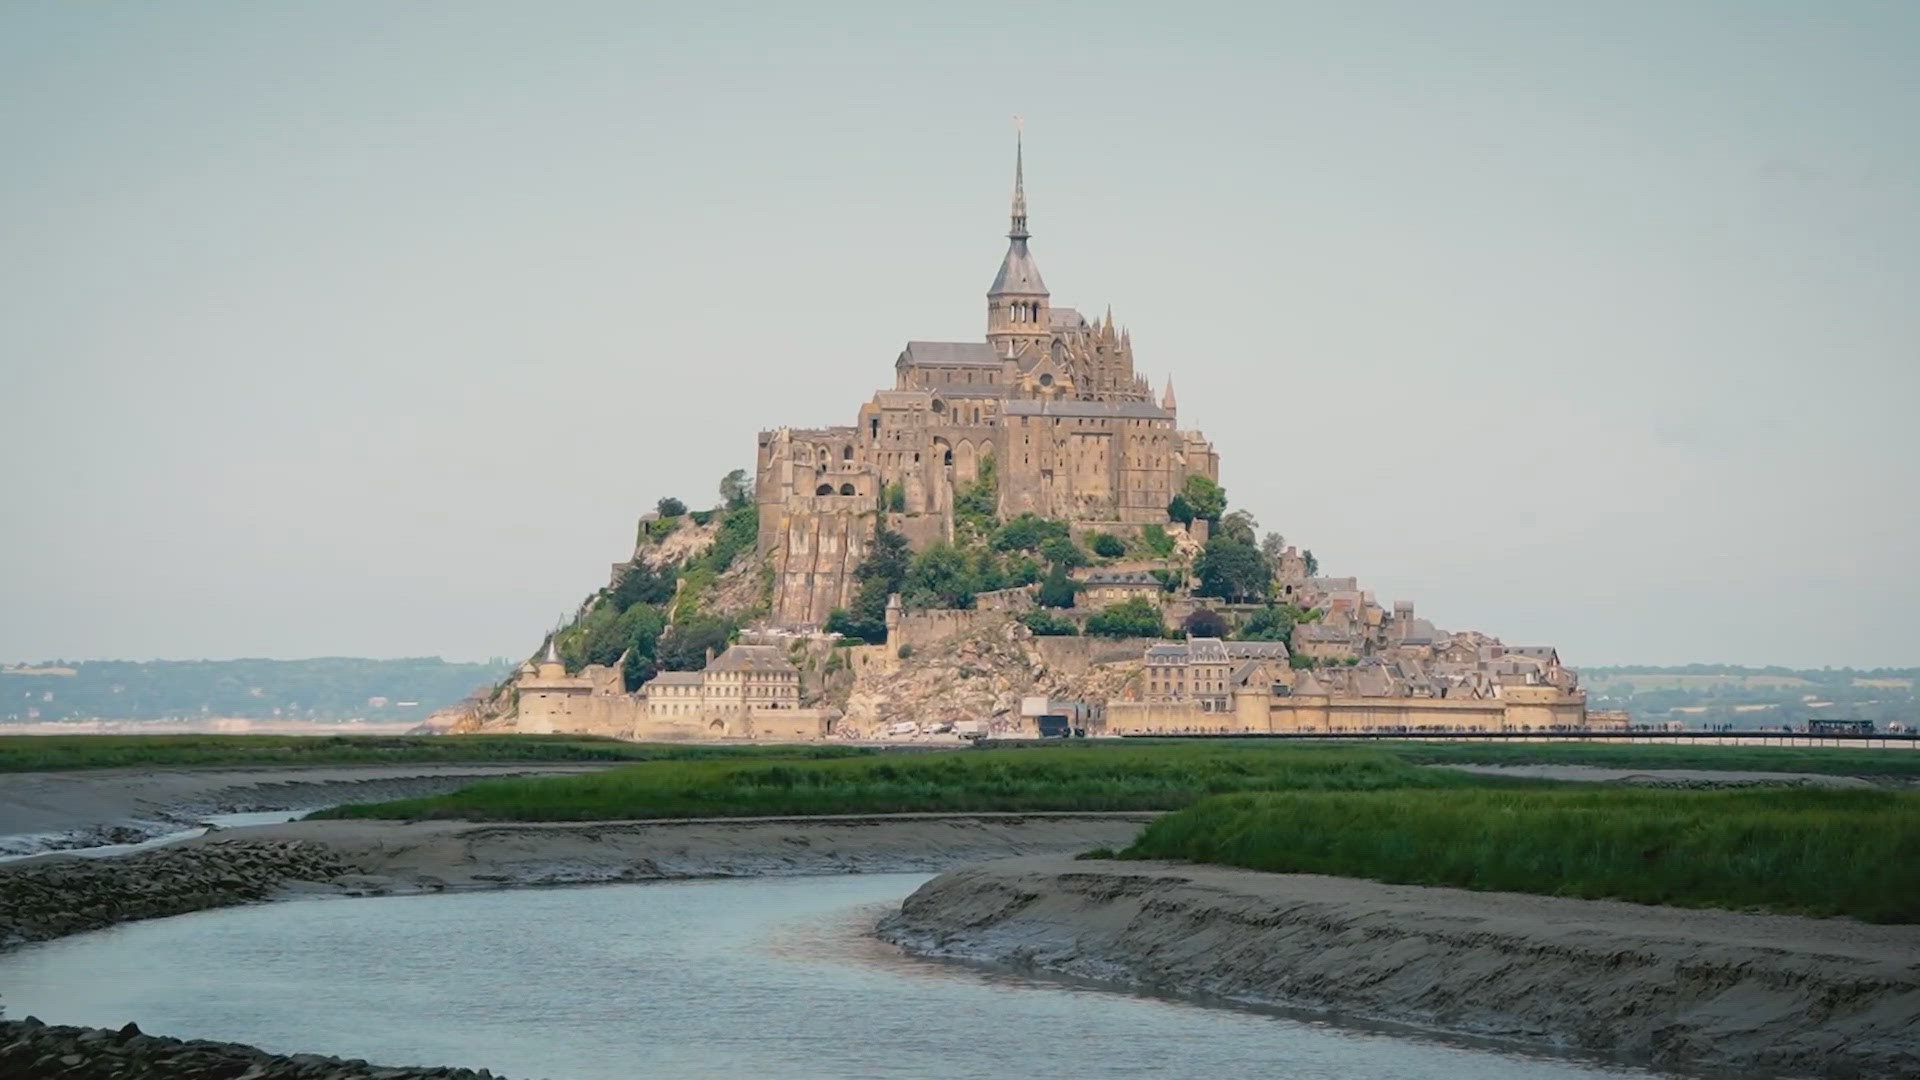 13News drove four and a half hours from Paris to the Normandy coast, learning first hand why Mont-Saint-Michel draws millions of visitors every year.